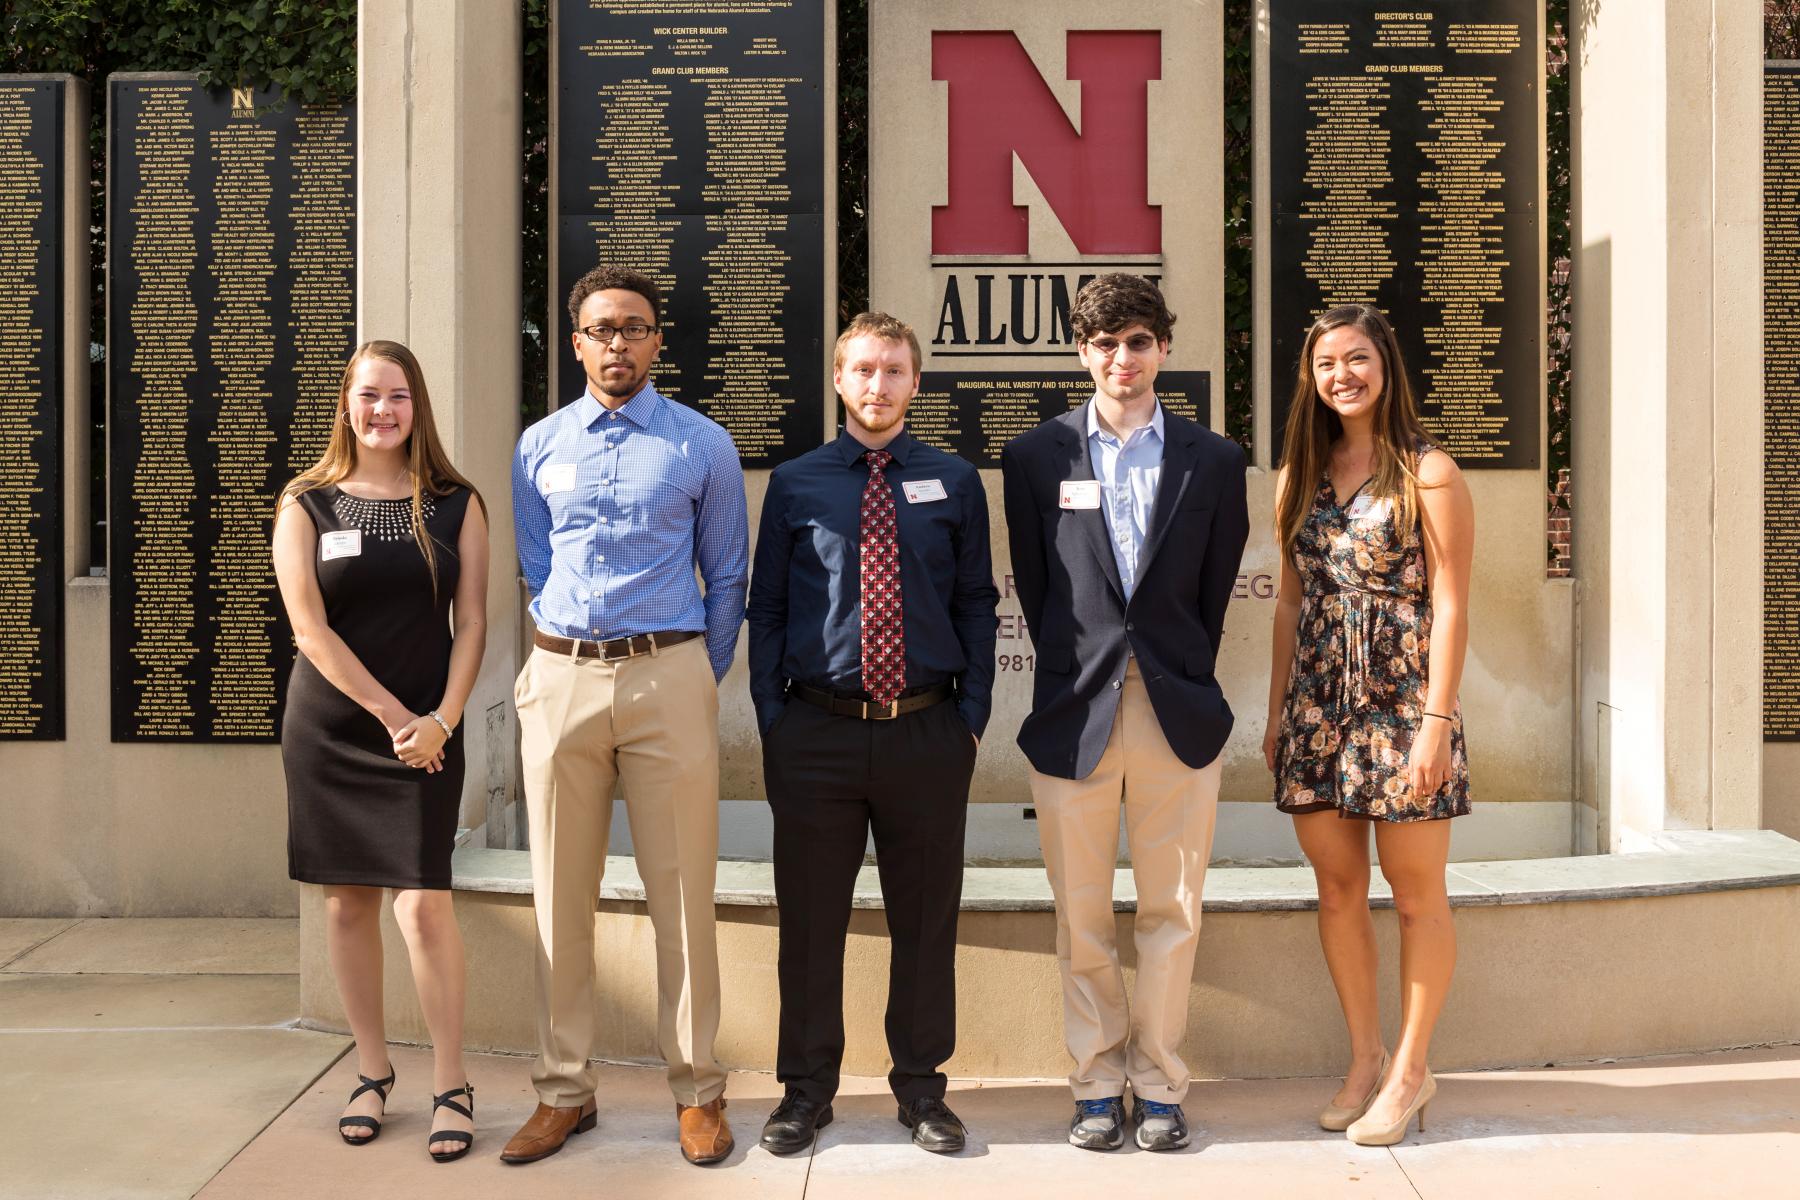 Summer Research Program students at the annual banquet. From left to right: Brooke Lampe, Quavanti Hart, Andrew Snyder, Jesse Schulman, and Victoria Moran.